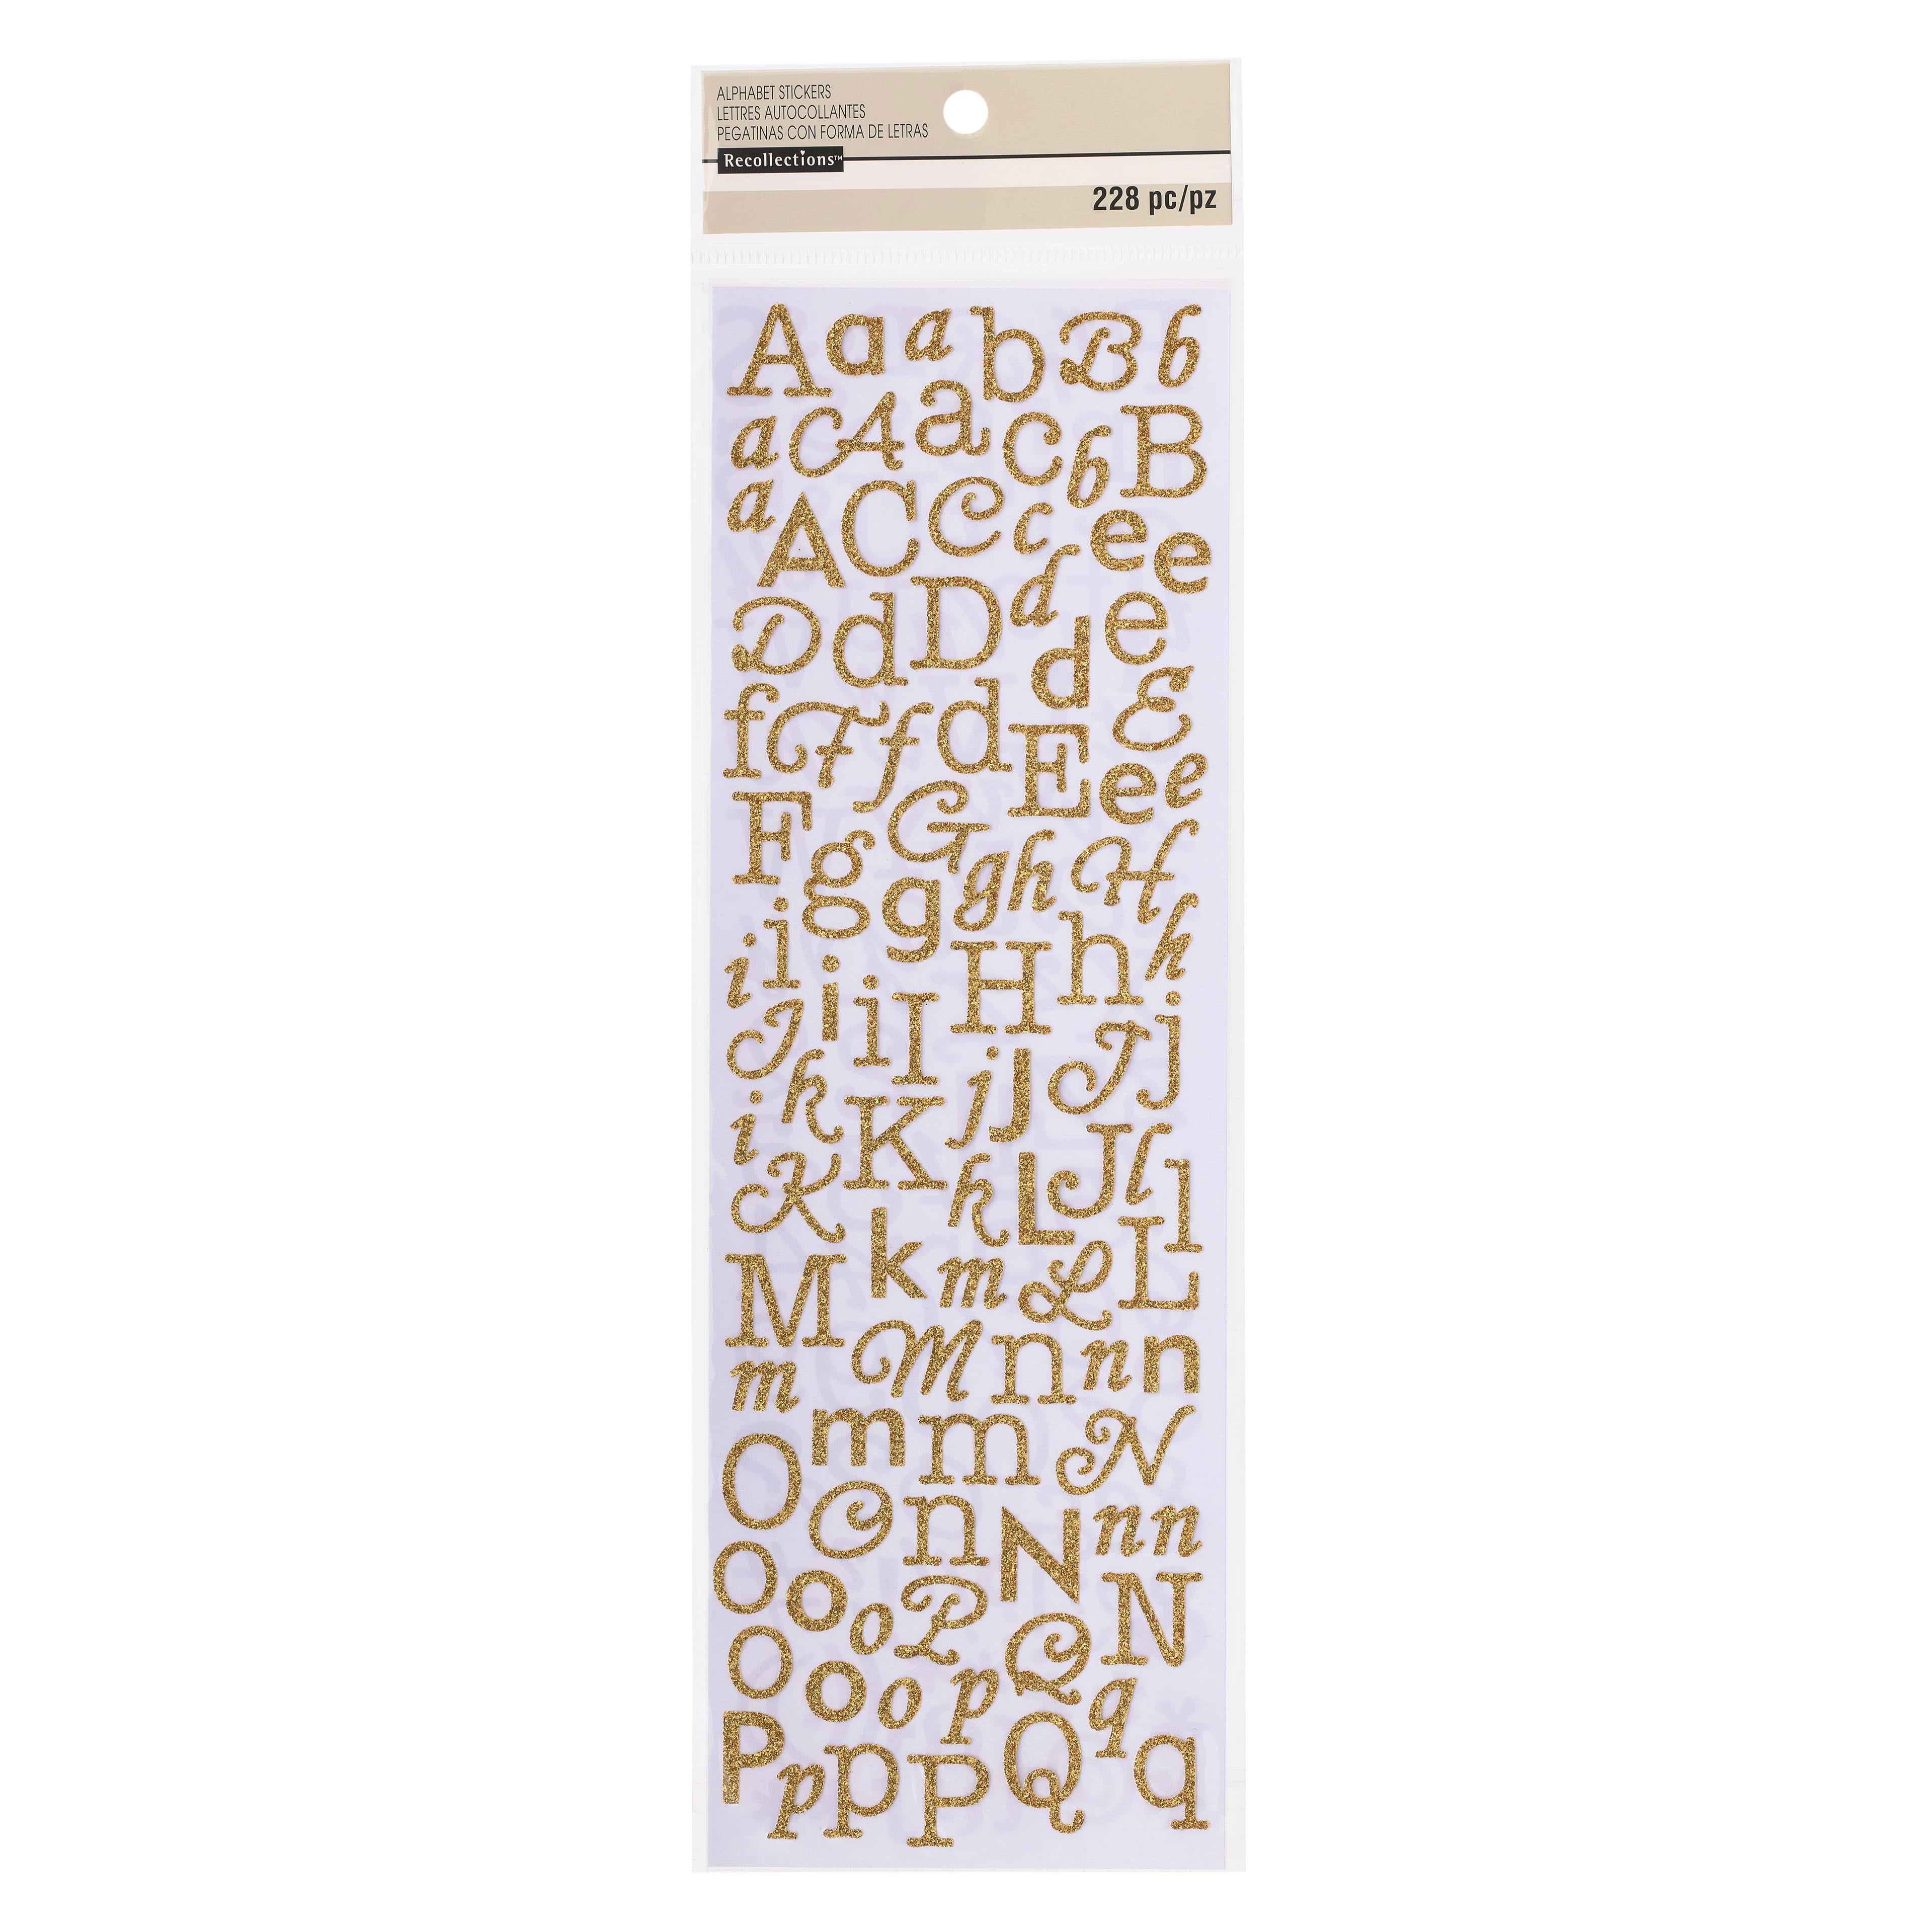 12 Packs: 85 ct. (1,020 total) Bernhard Gold Glitter Alphabet Foam Stickers  by Recollections™